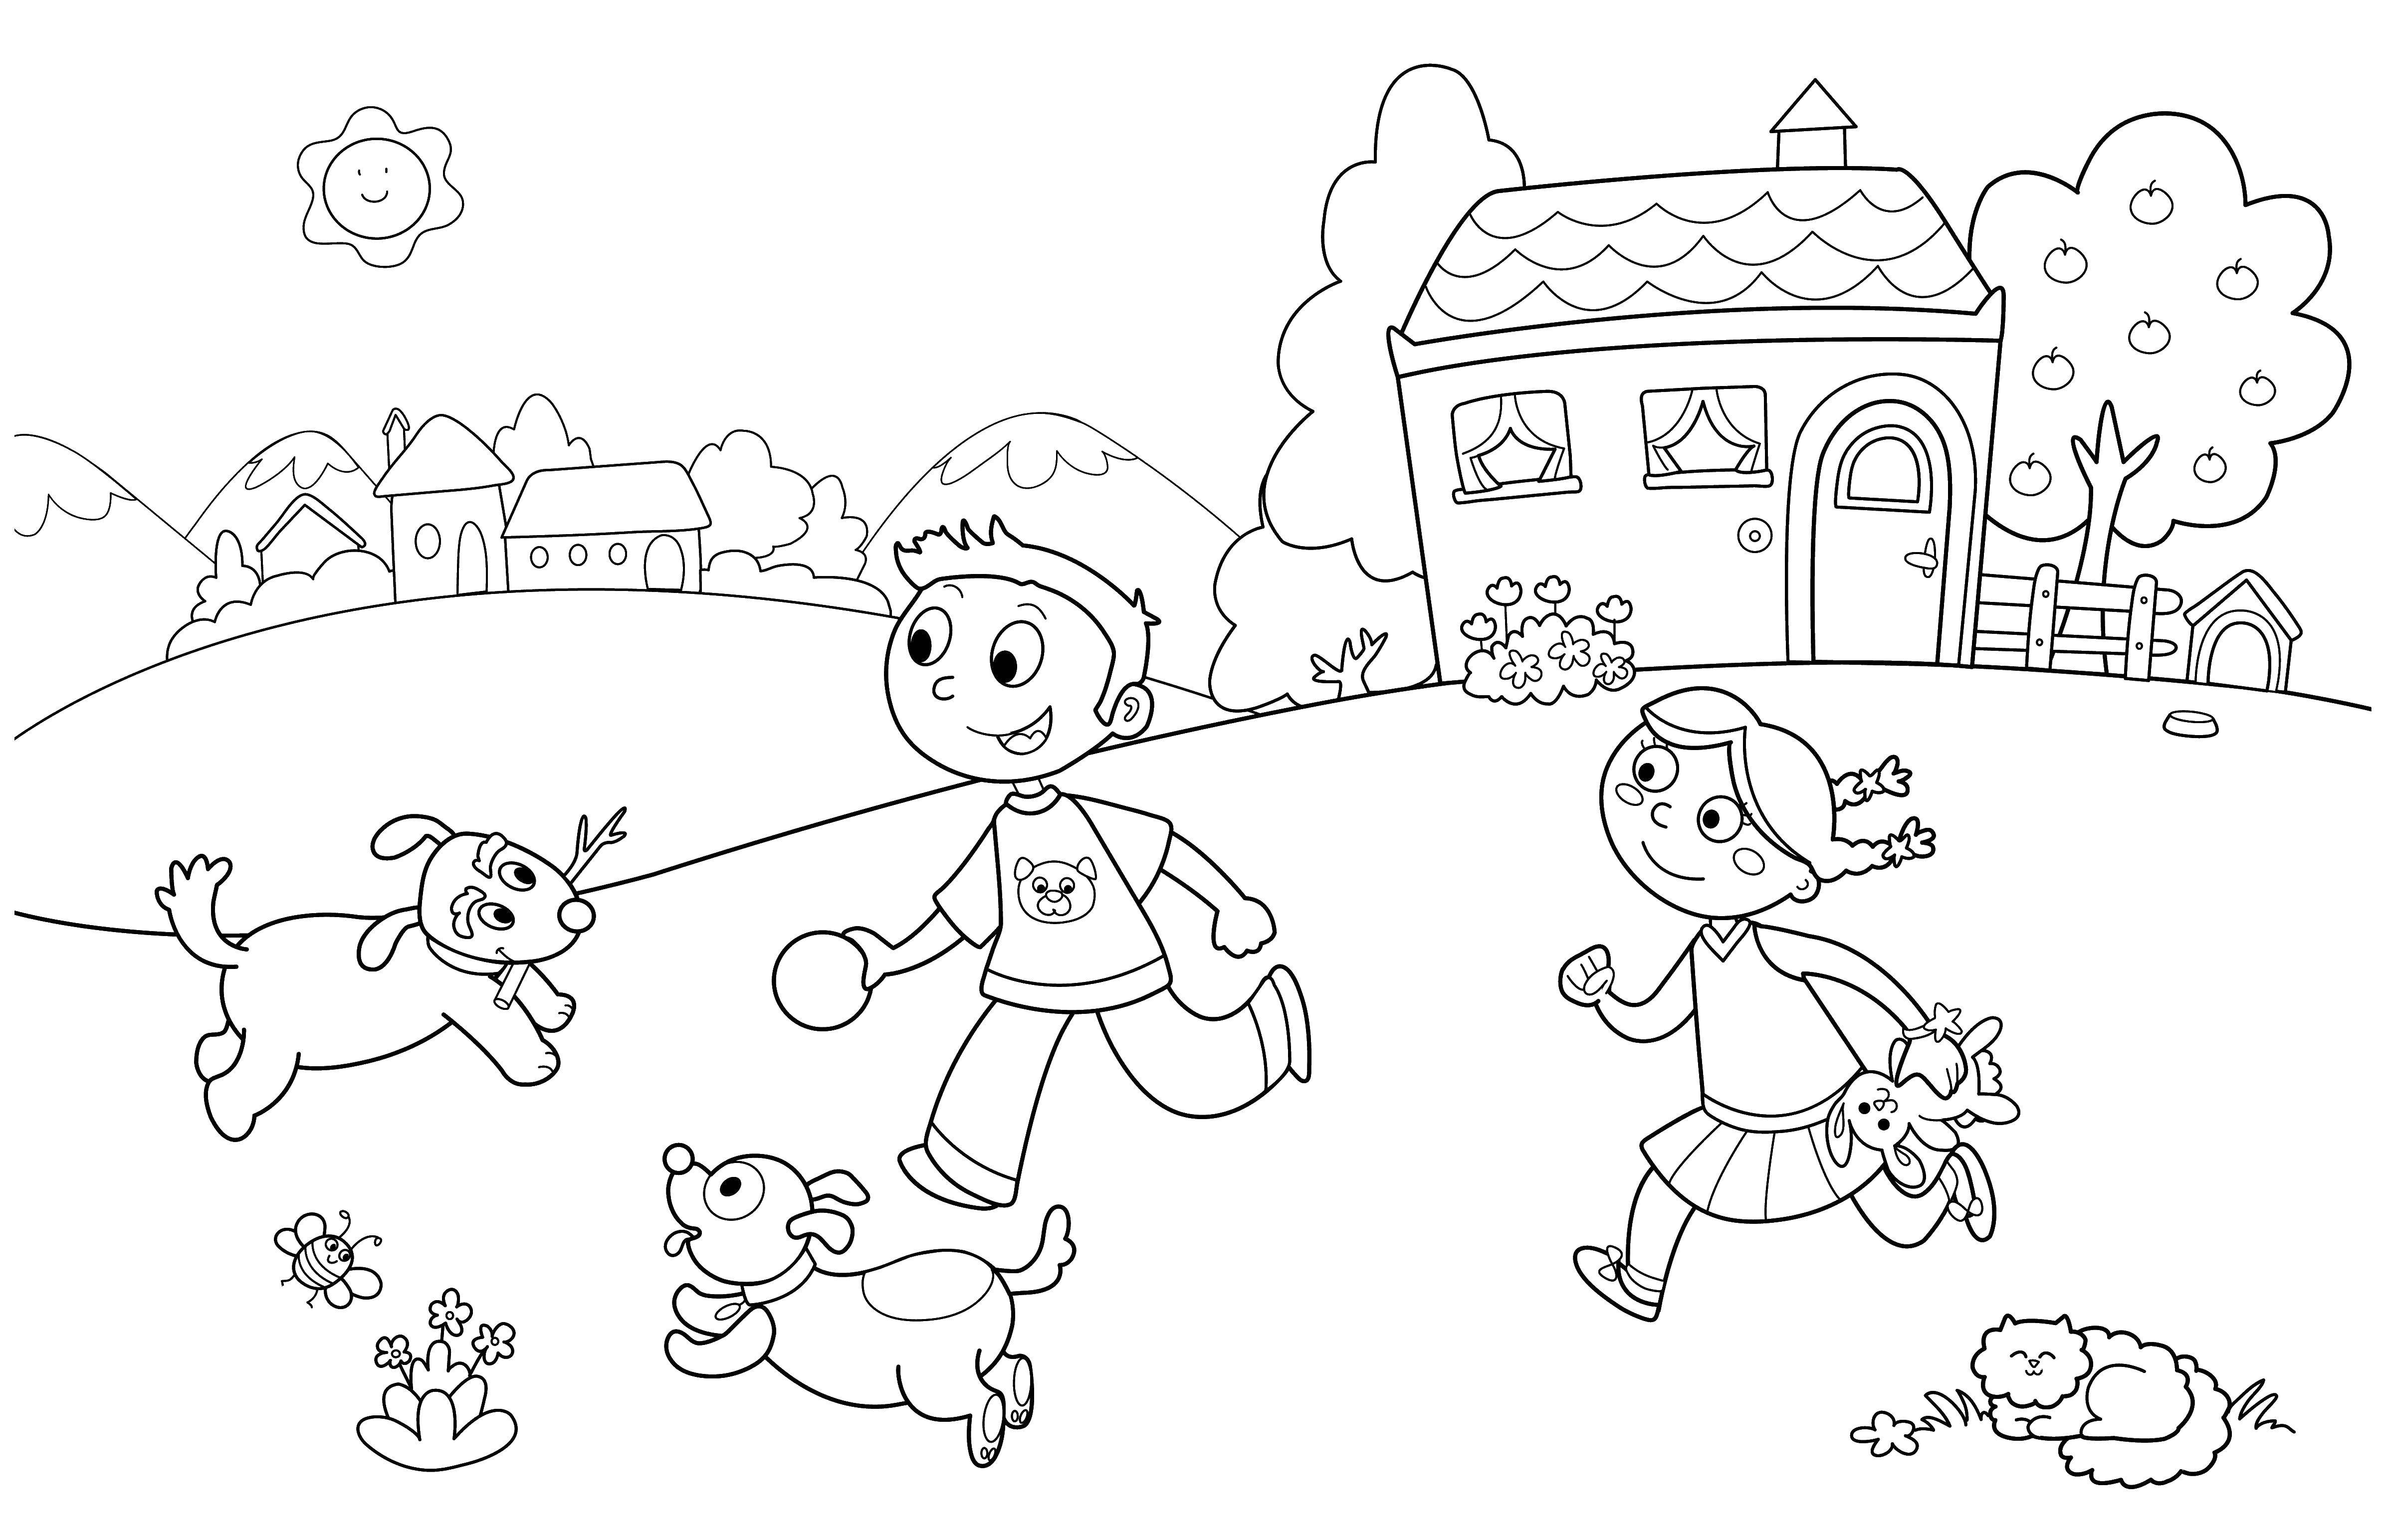 Coloring Children and dogs playing. Category Summer fun. Tags:  summer, fly, dogs, games.